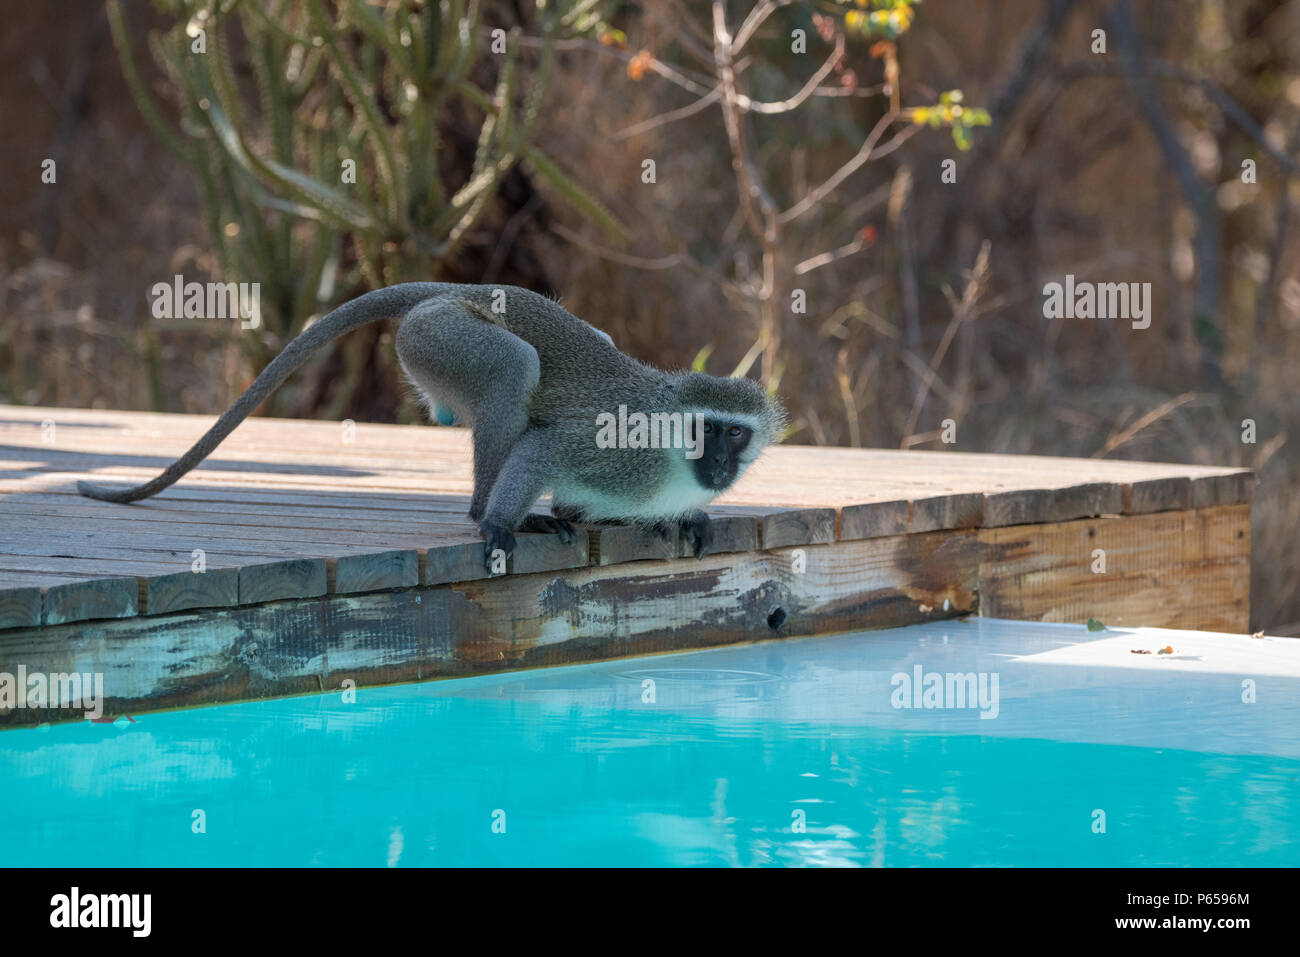 Monkey drinking from a swimming pool Stock Photo